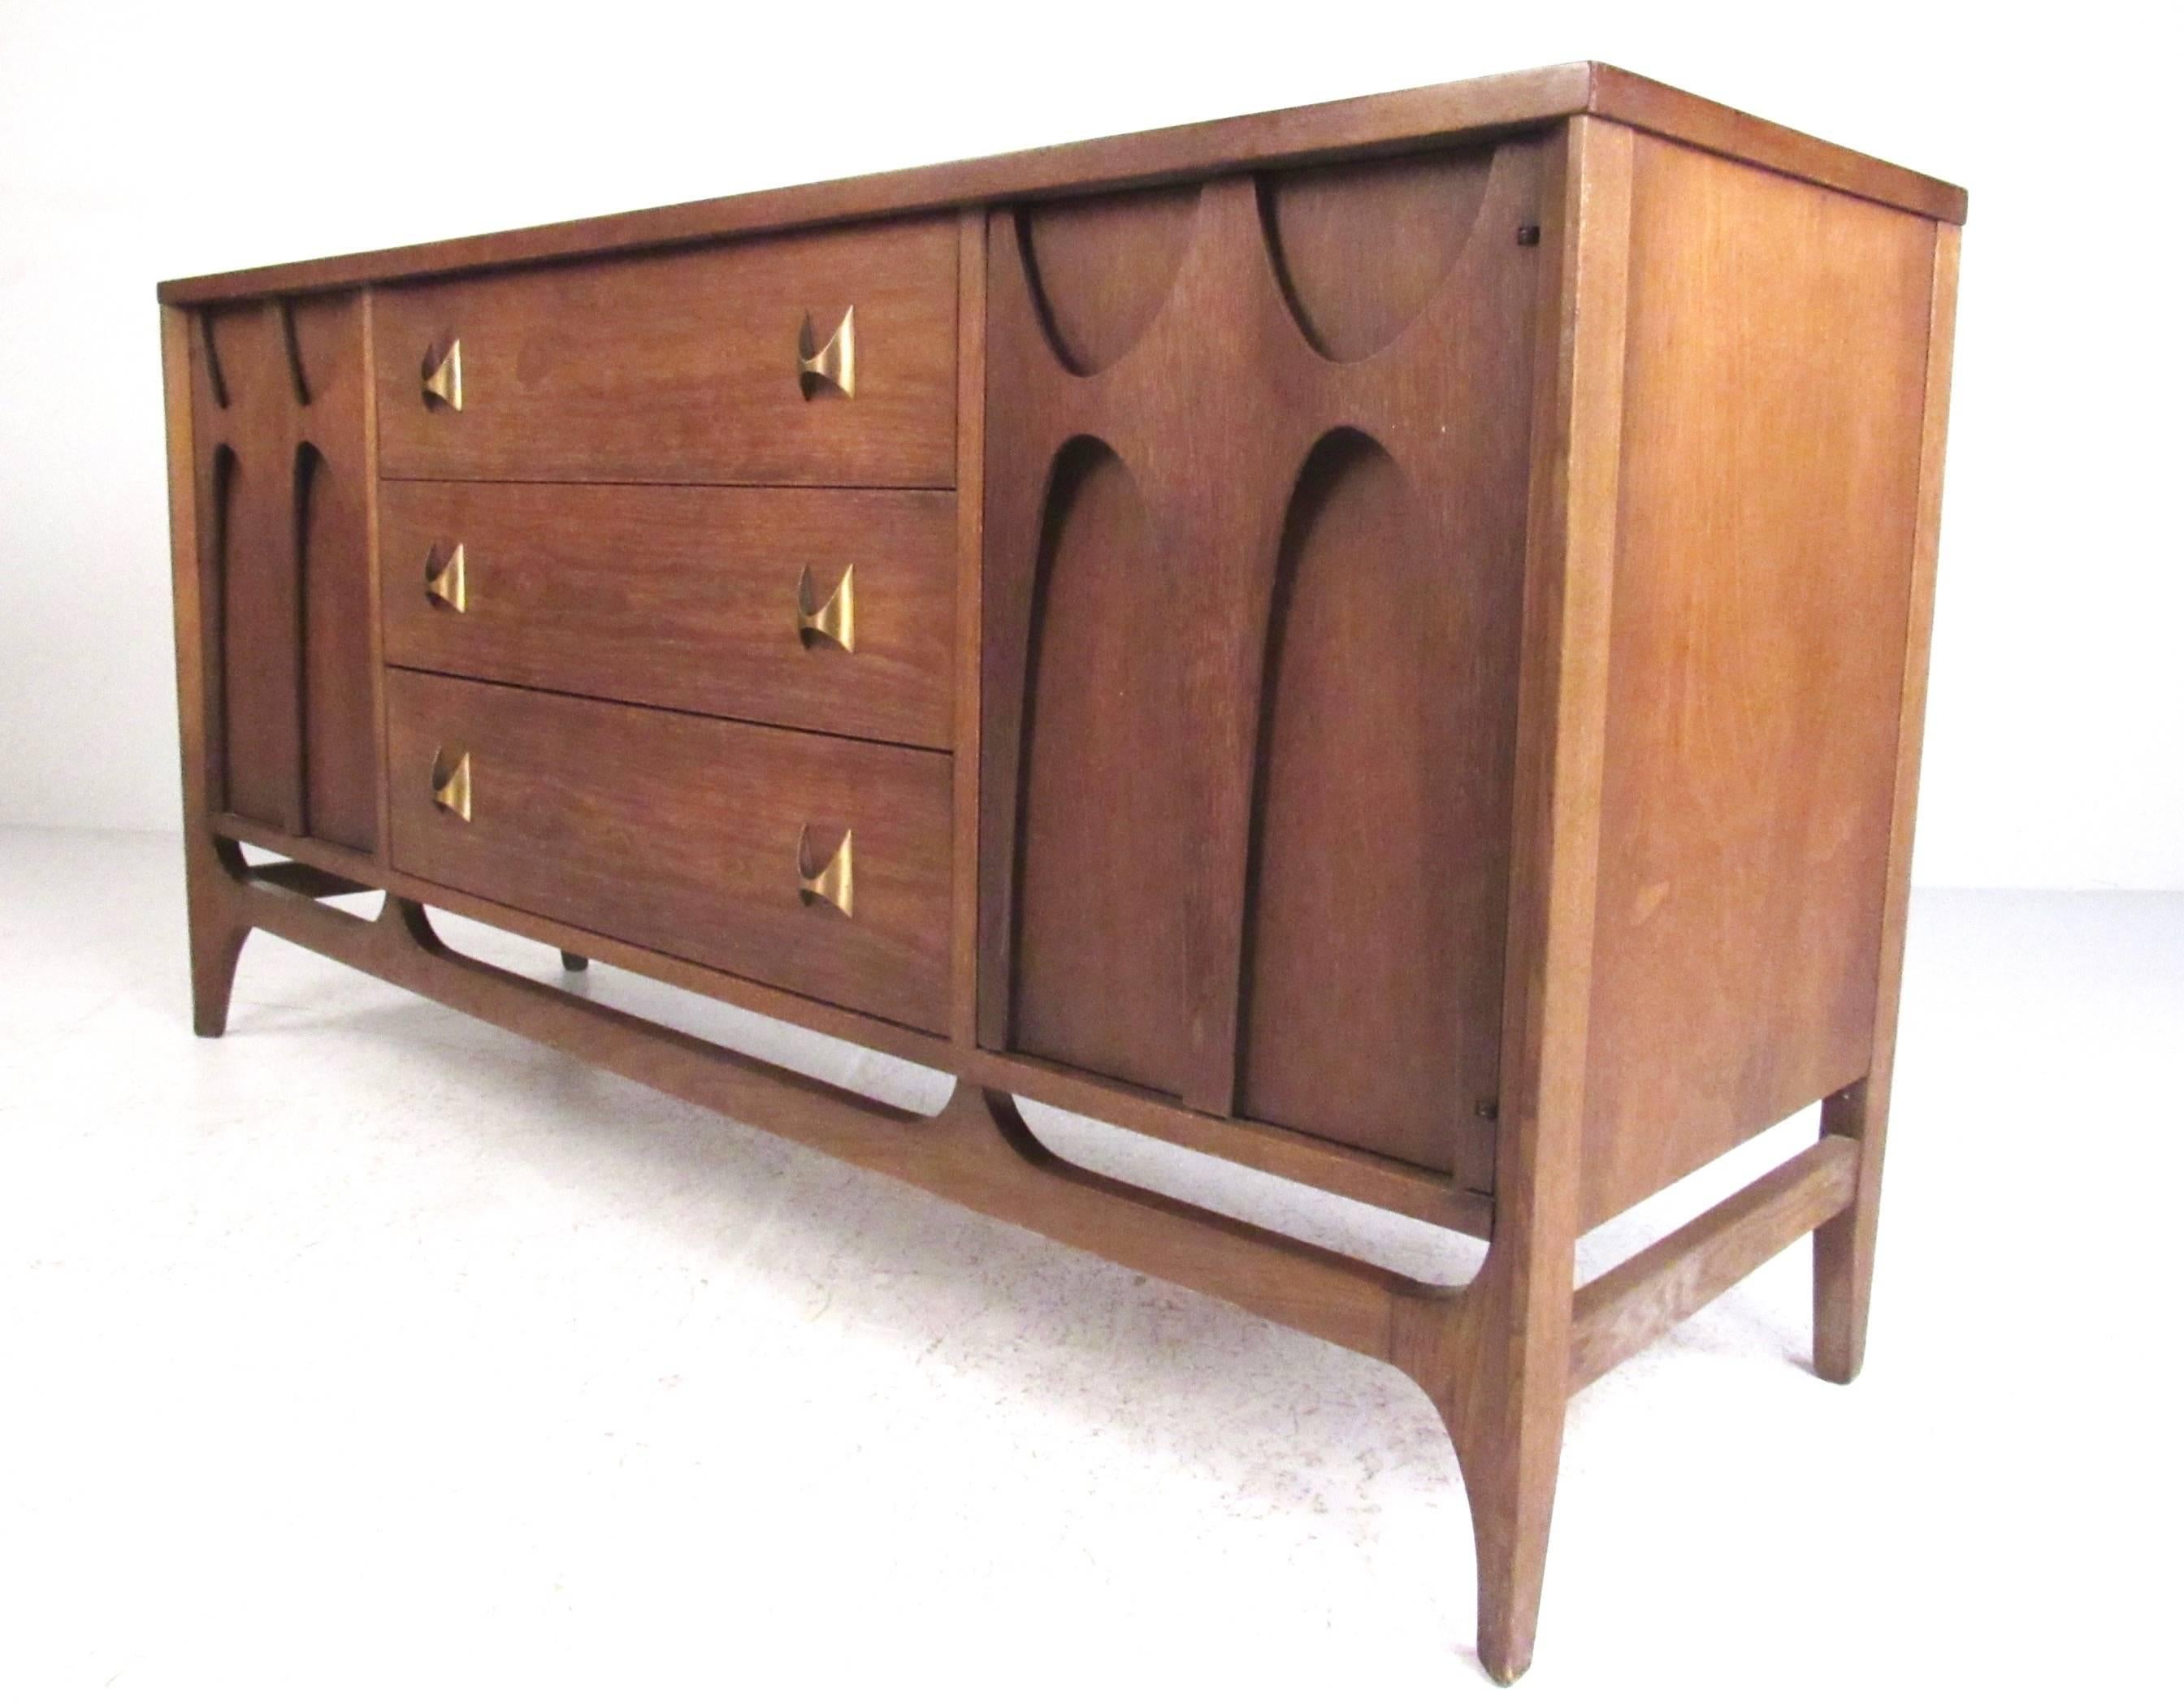 This uniquely sized walnut sideboard features classic Broyhill Brasilia sculpted cabinet doors and matching brass drawer pulls. This stylish mid-century sideboard makes a lovely addition to any interior and works well as a television console or